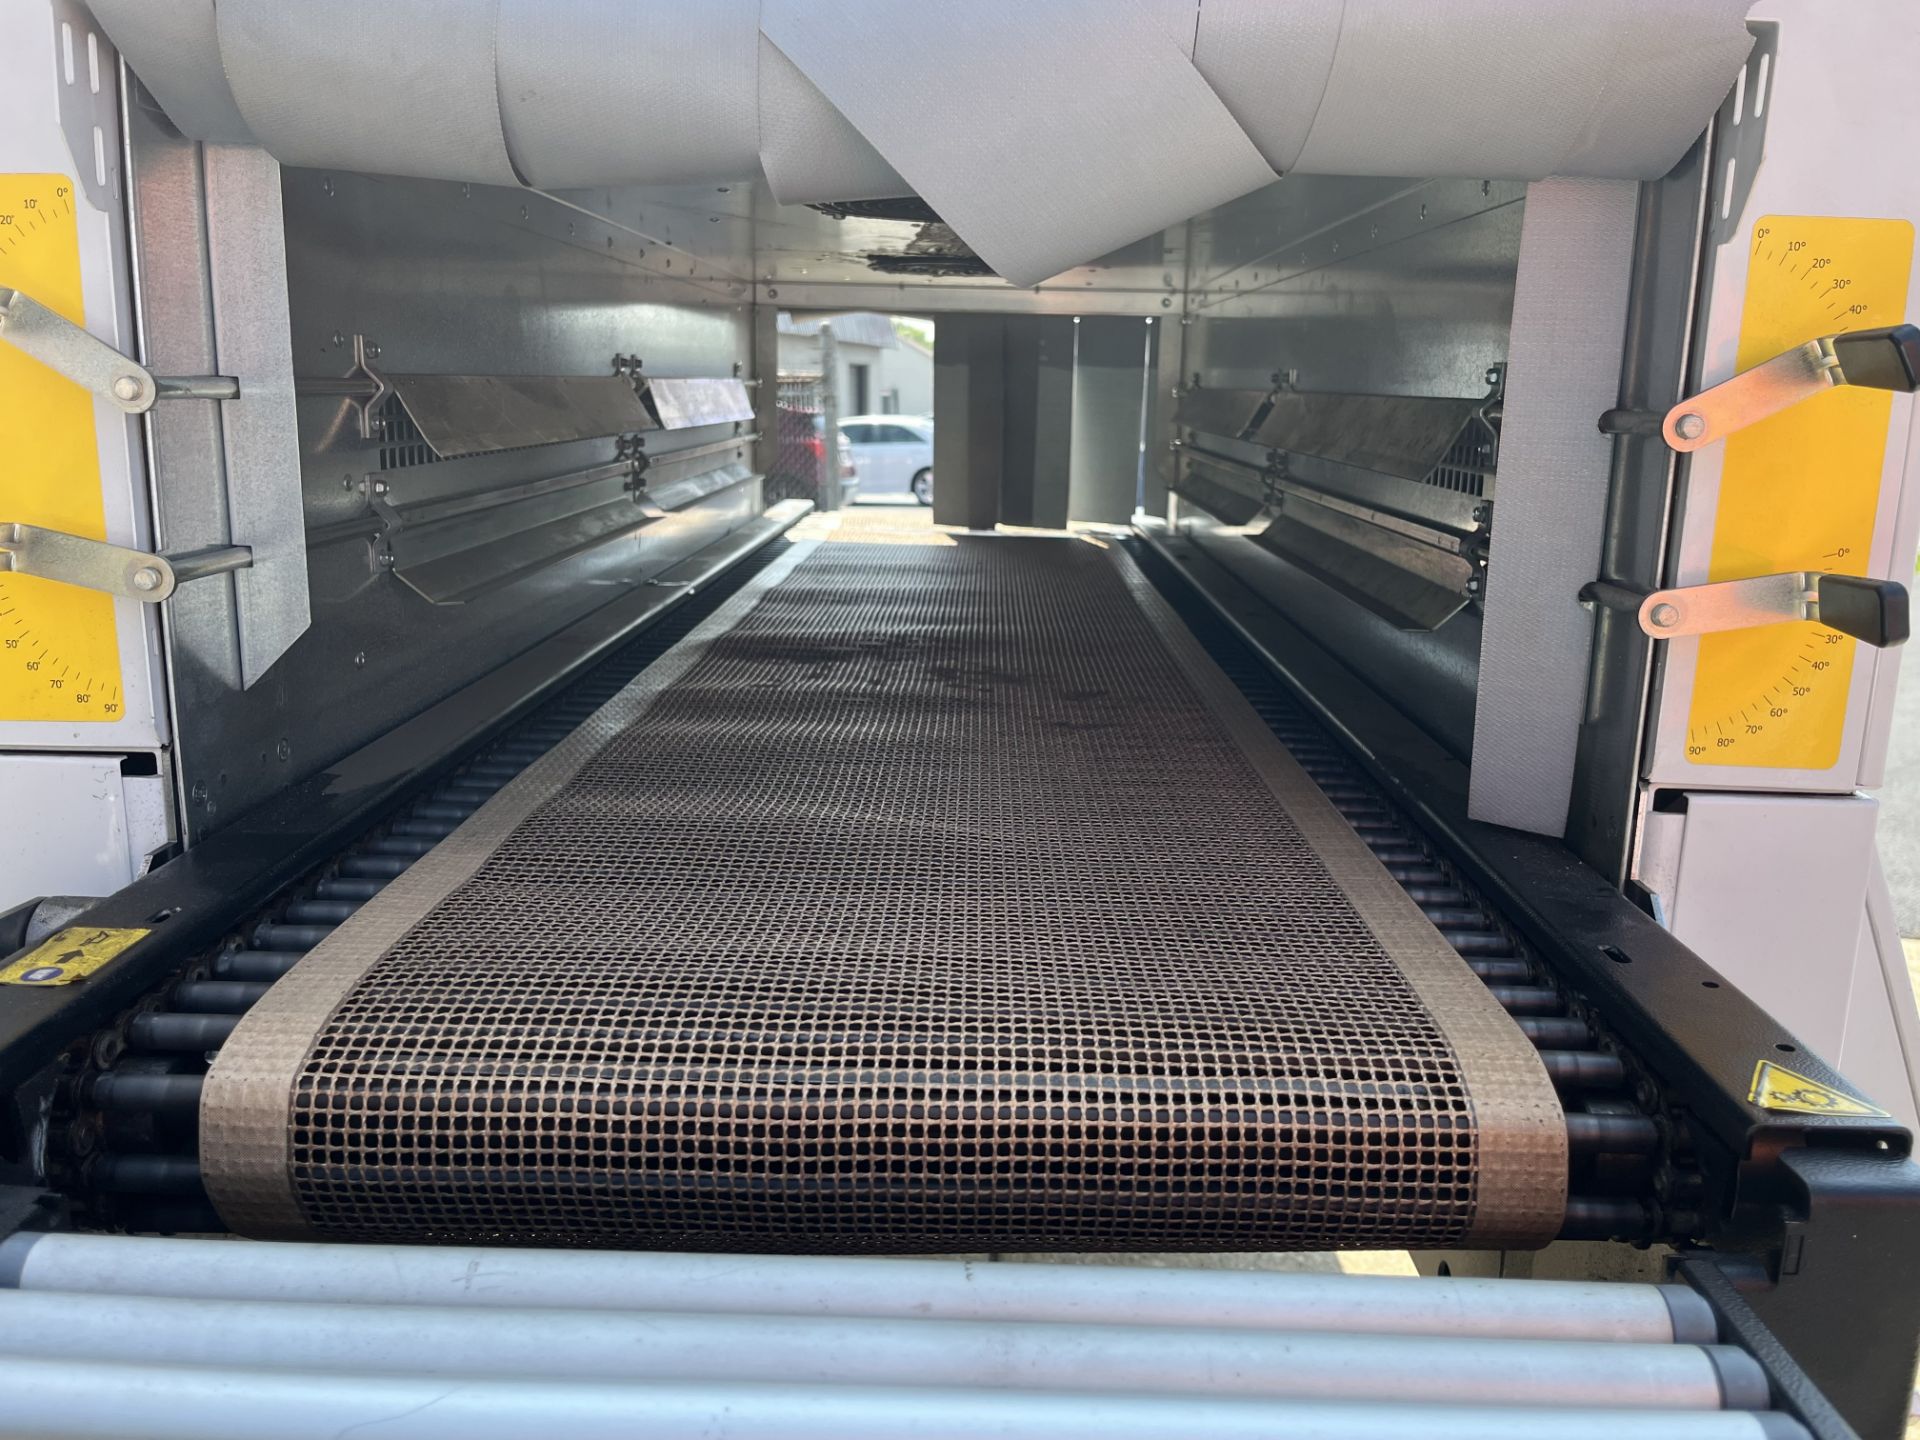 Auto Side Sealer, Heat Tunnel, and Infeed Conveyor - Image 41 of 60